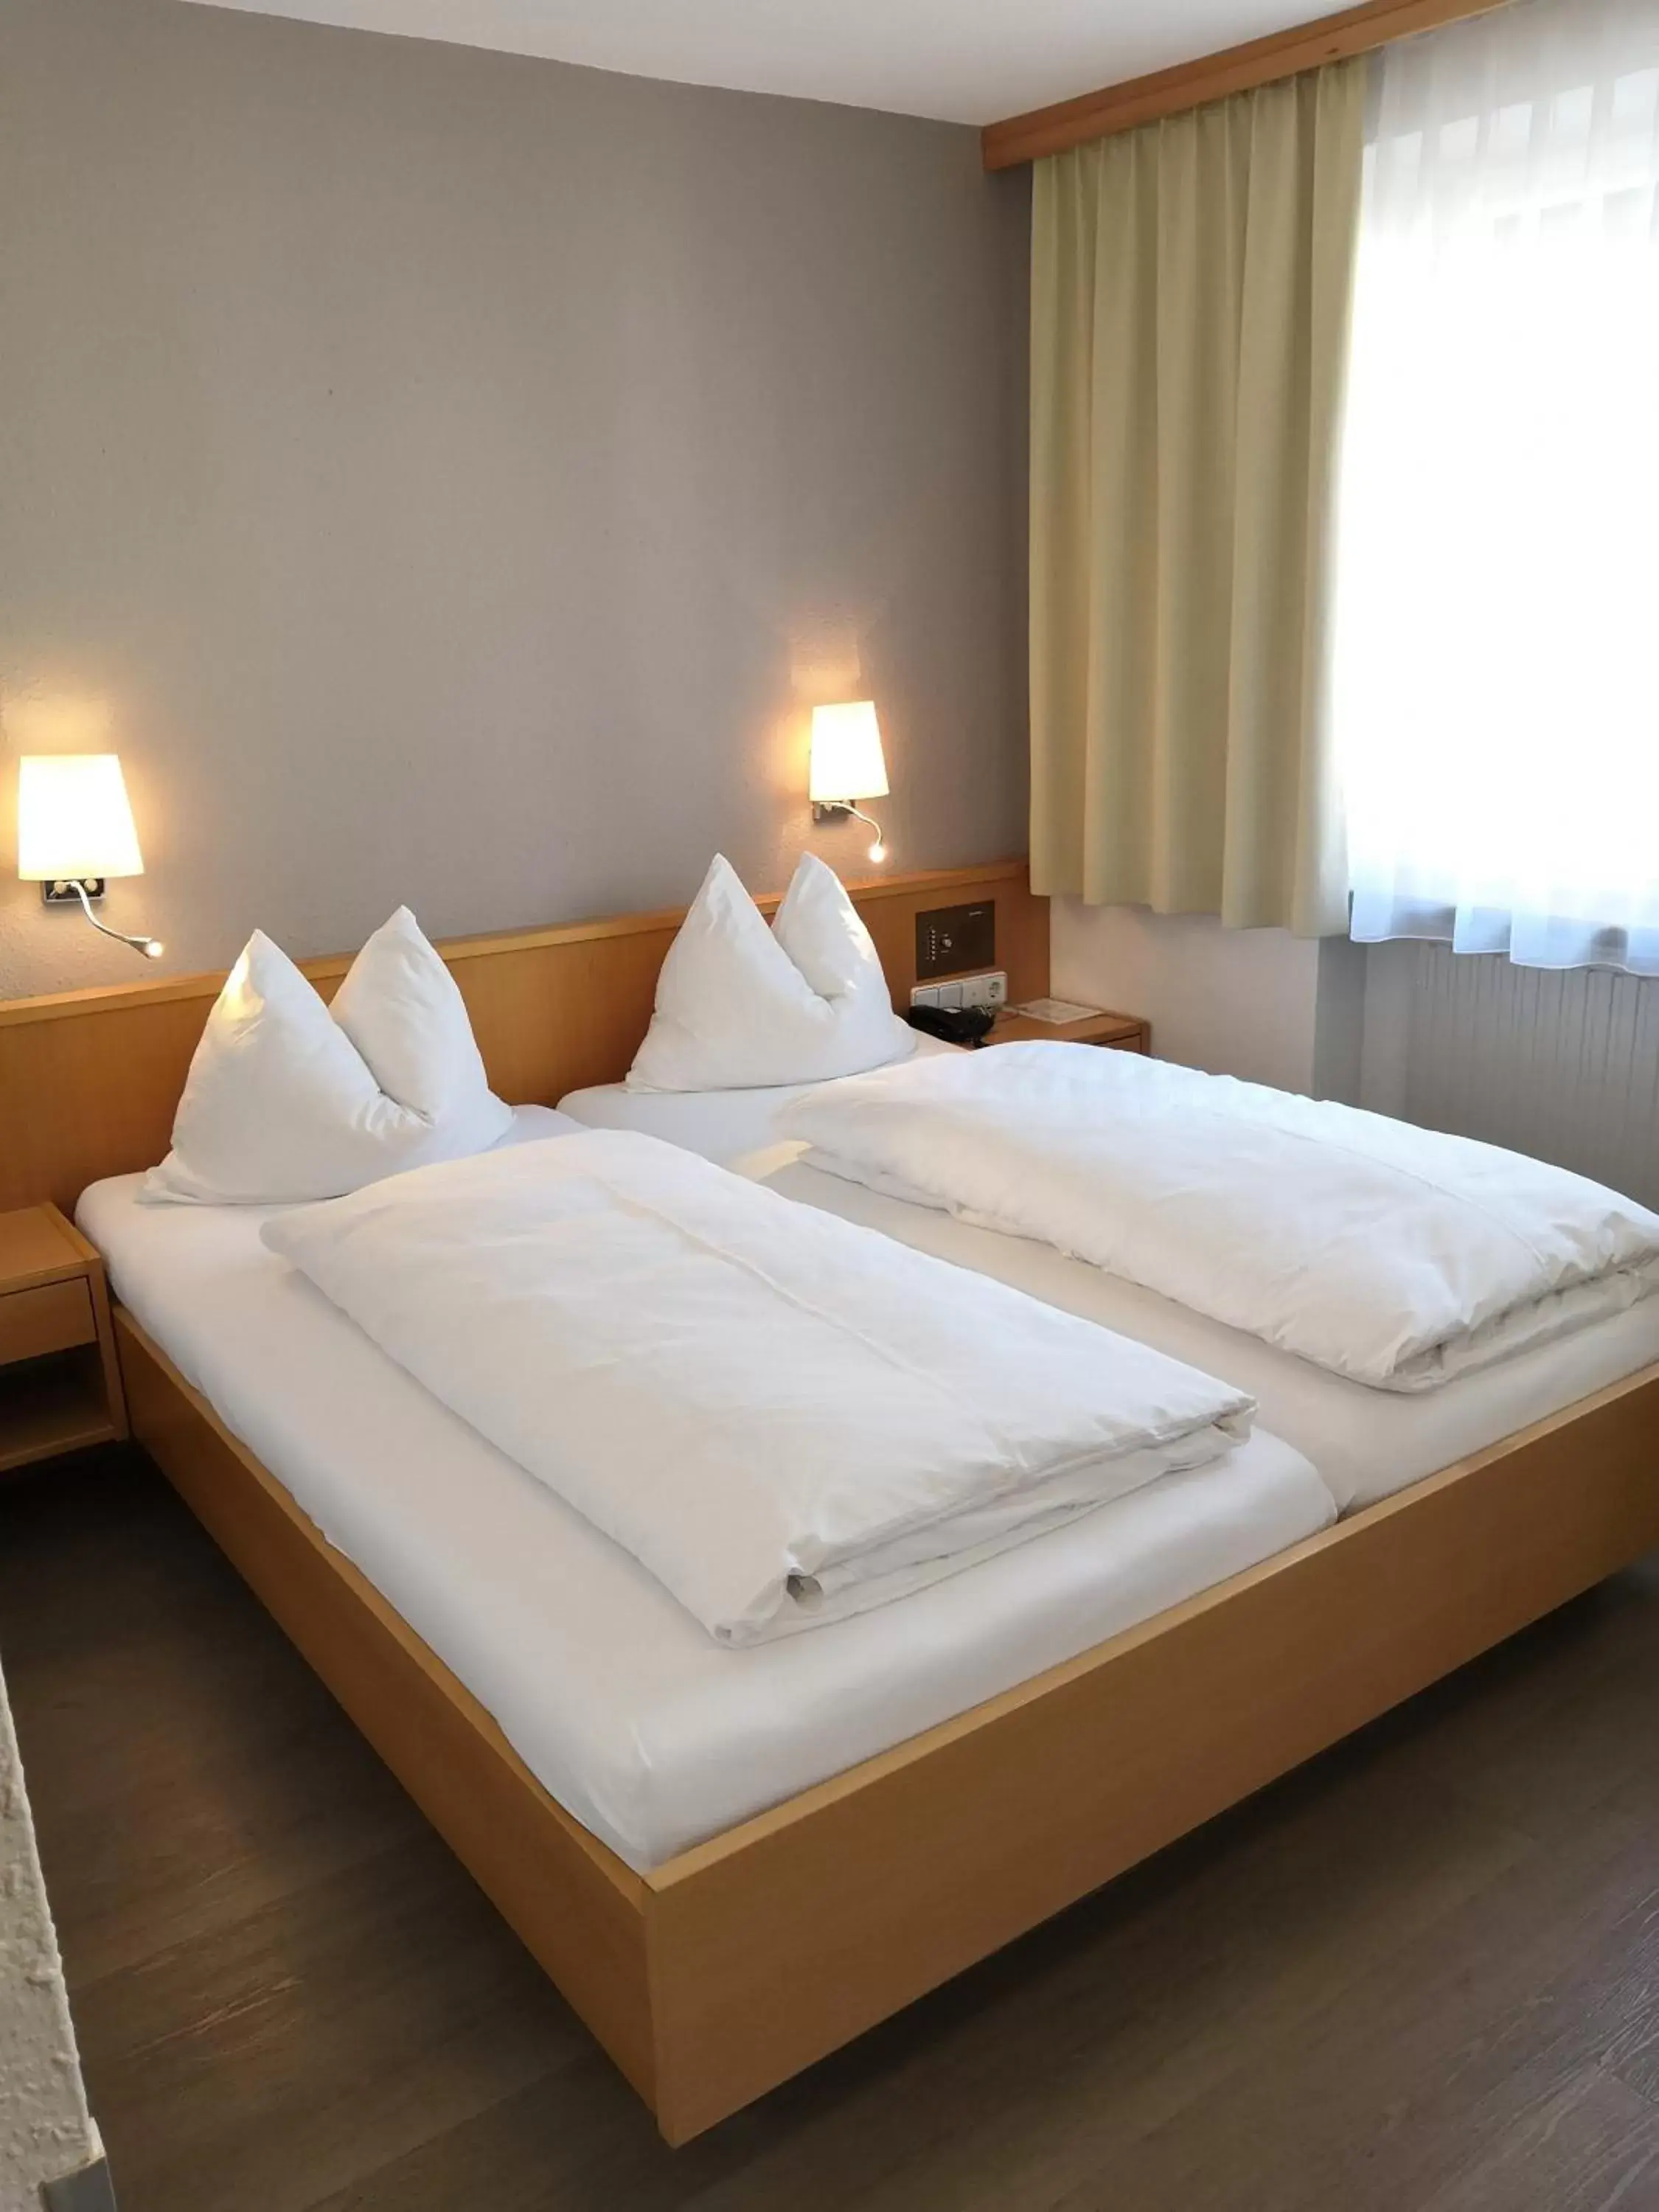 Double Room in Hotel Messmer